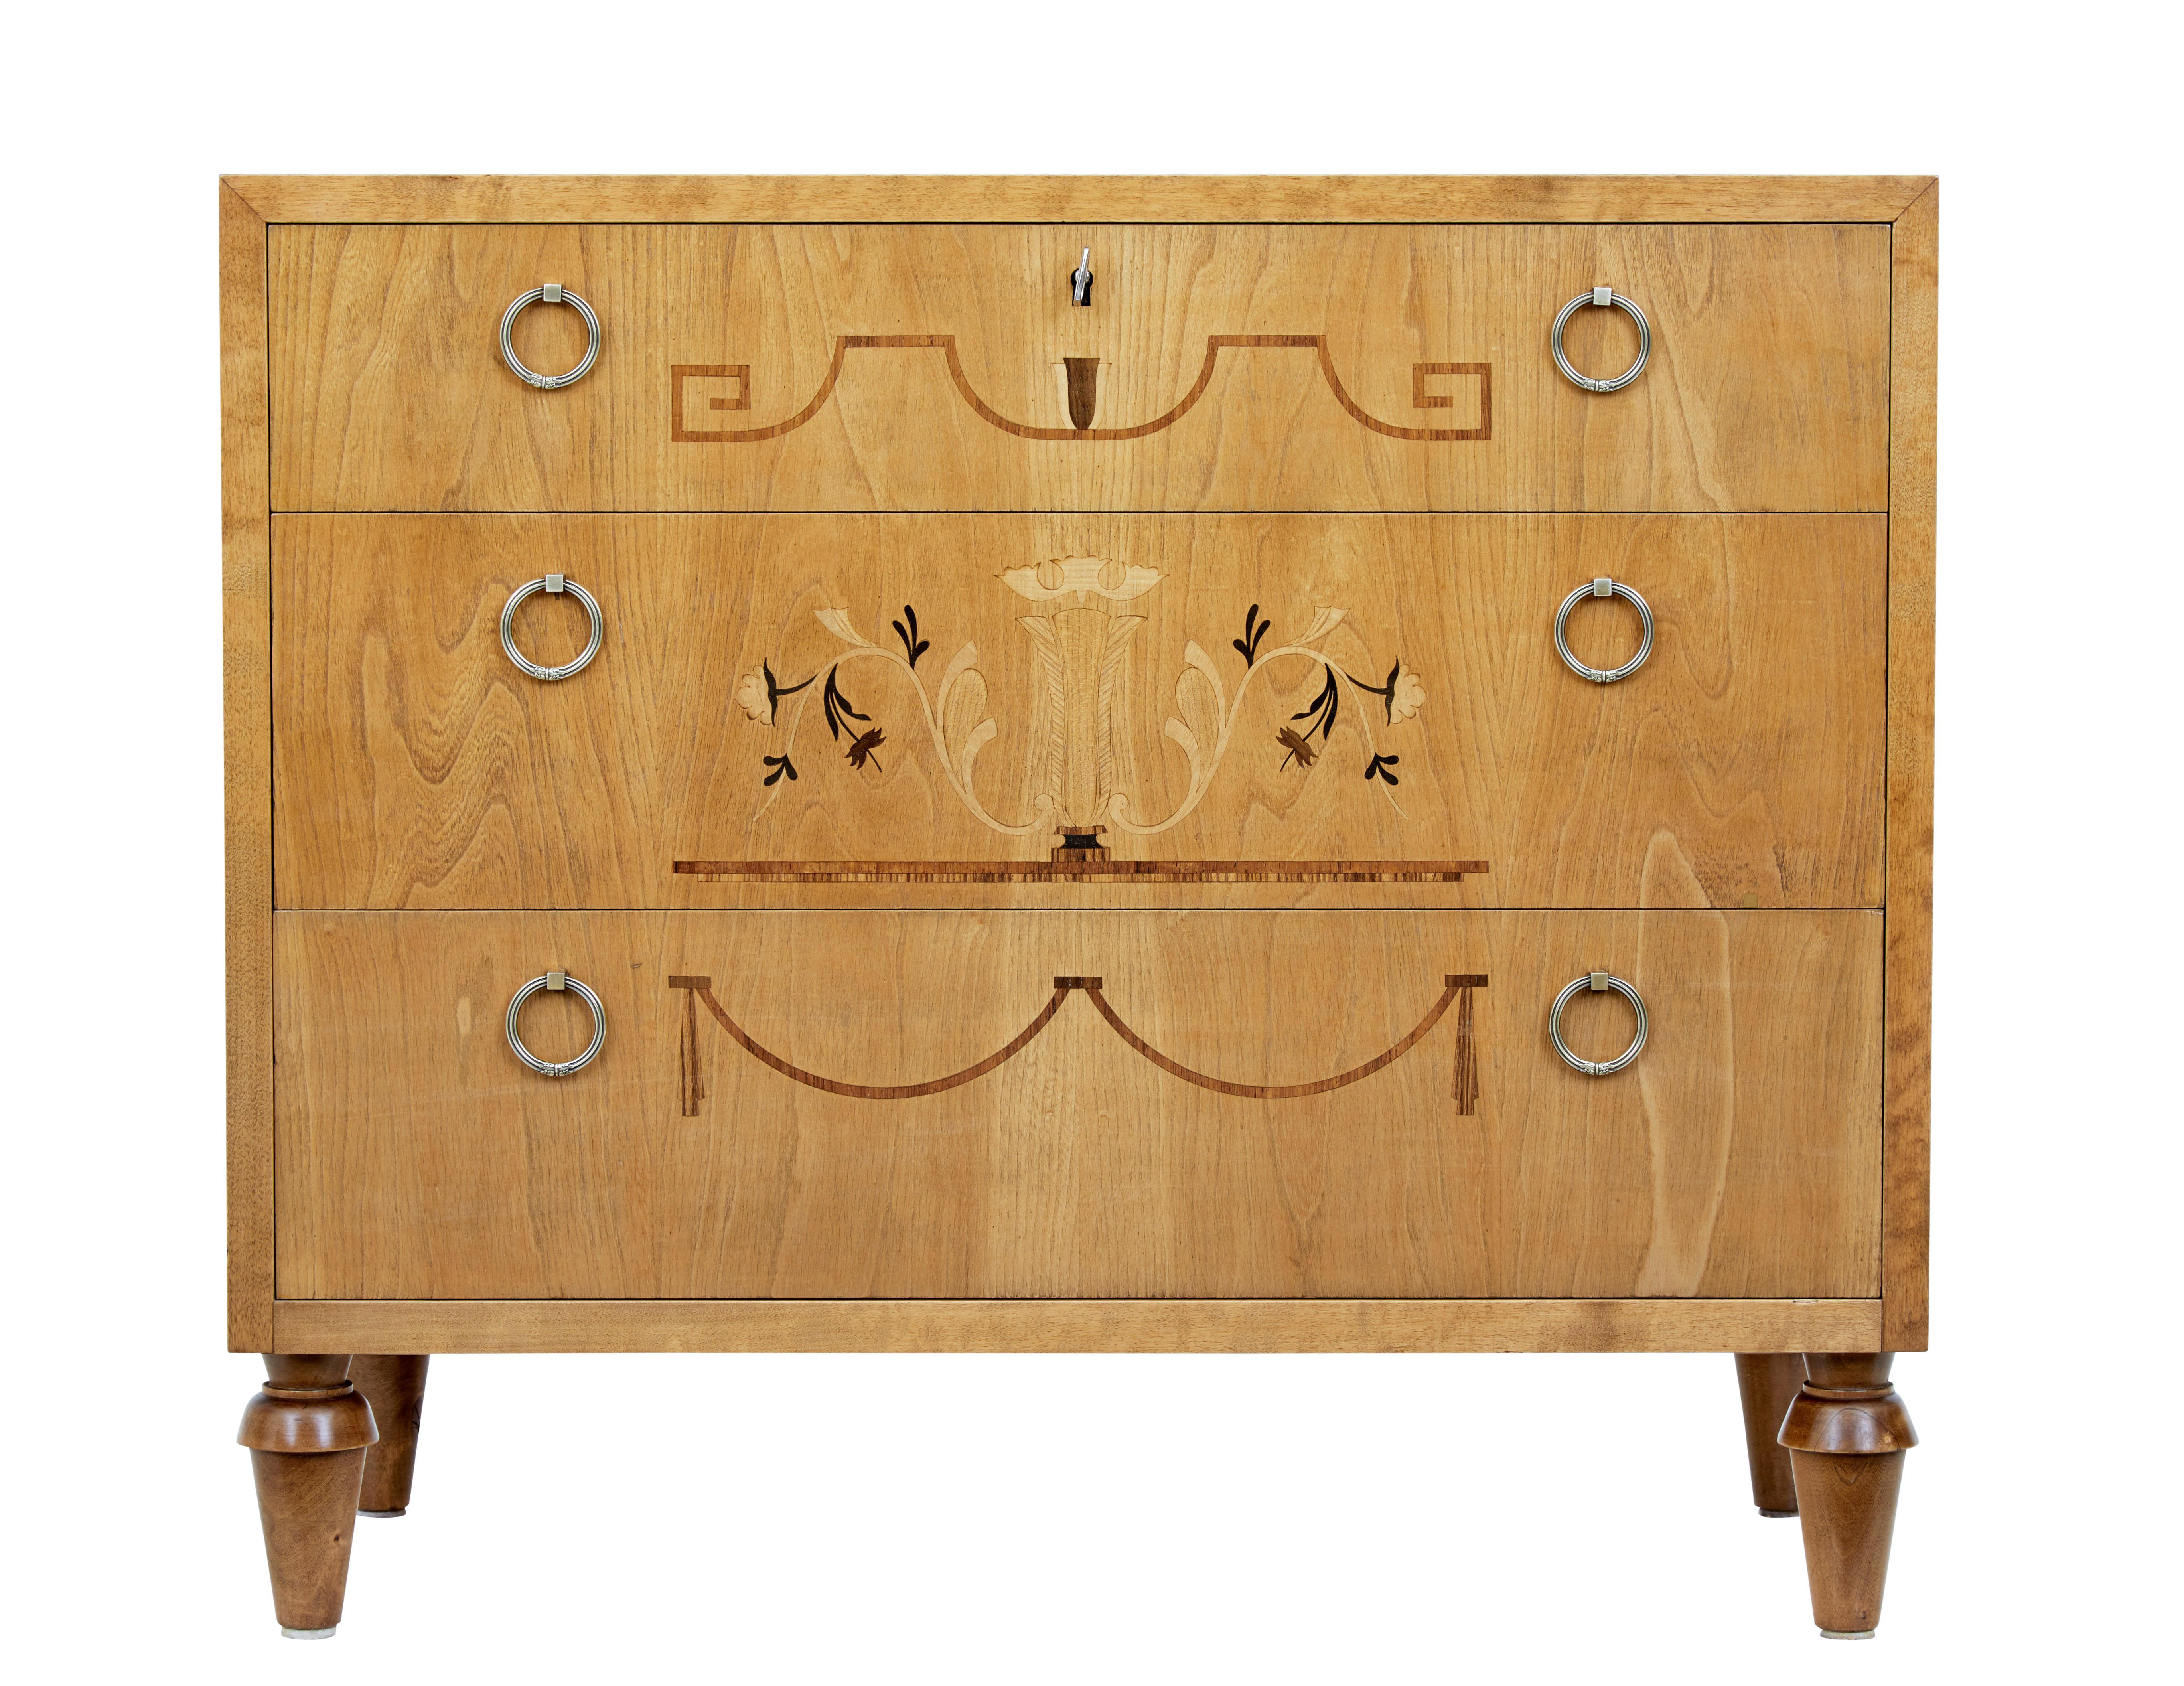 Late Art Deco inlaid elm and birch chest of drawers circa 1940.

Beautiful chest of drawers fitted with 3 graduating drawers. Each inlaid with classical designs in walnut and birch. Fitted with ornate ring handles.

Top drawer locking with